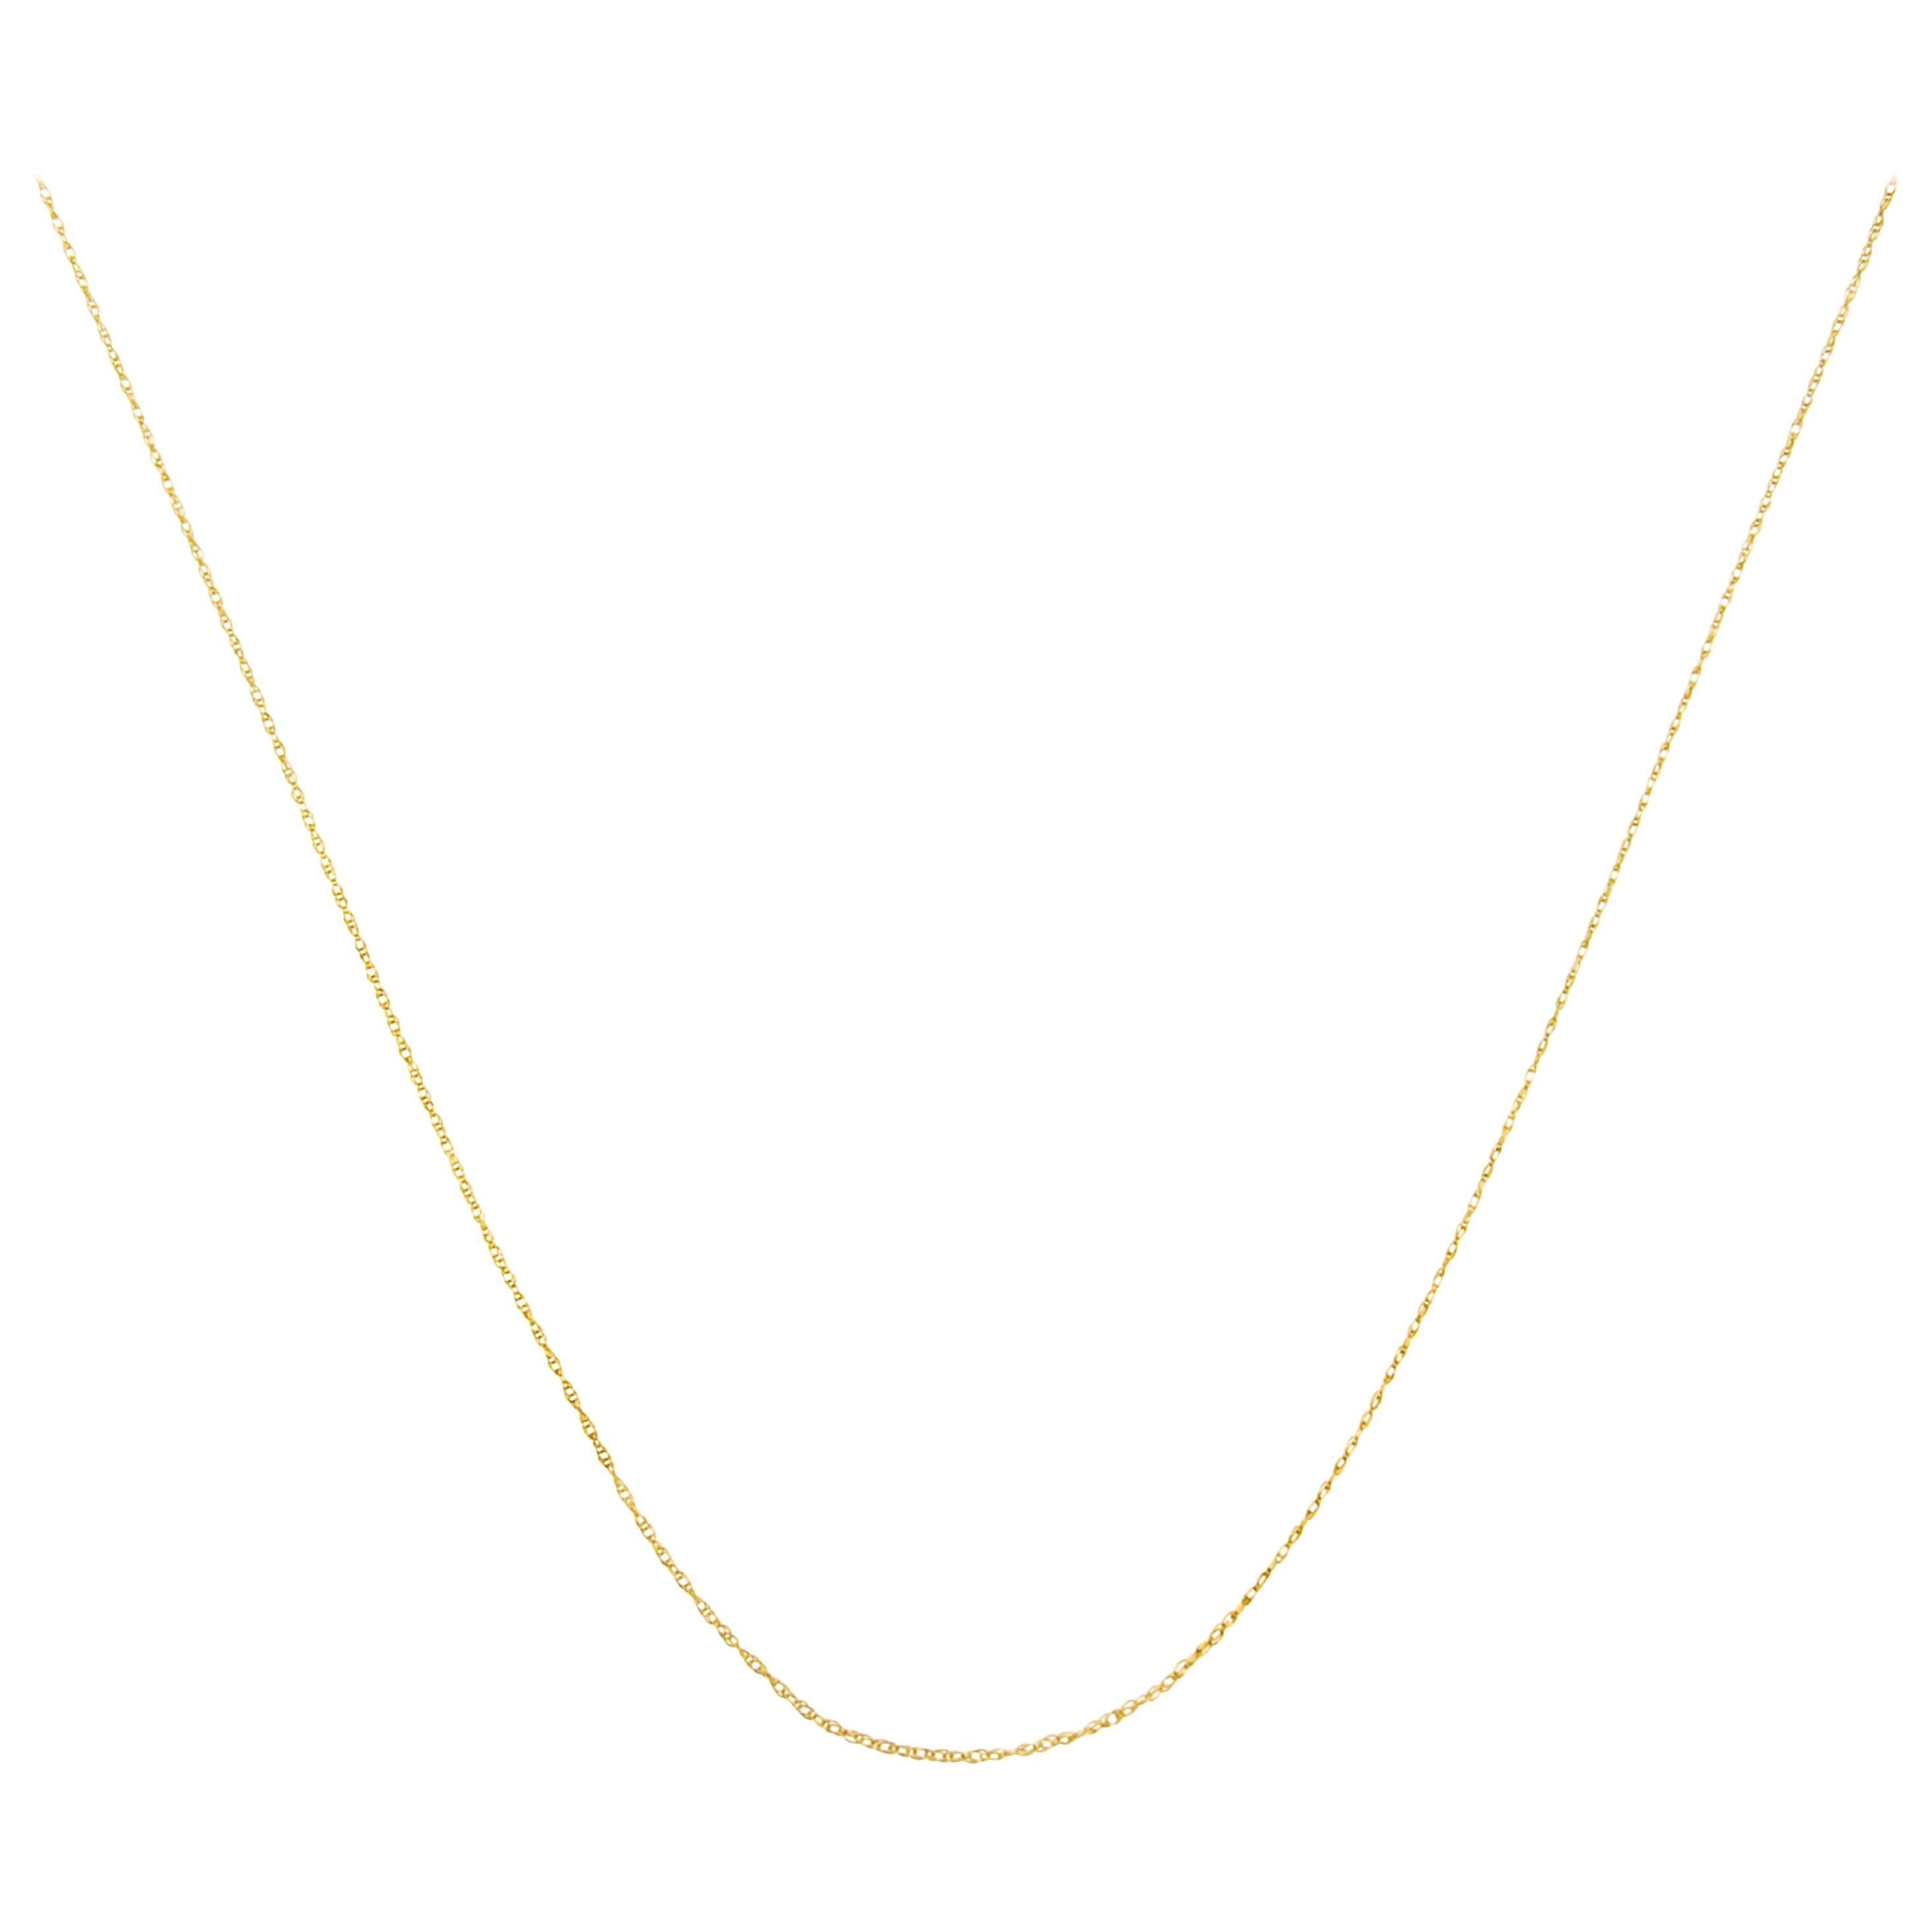 Solid 10k Yellow Gold Unisex Rope Chain Necklace